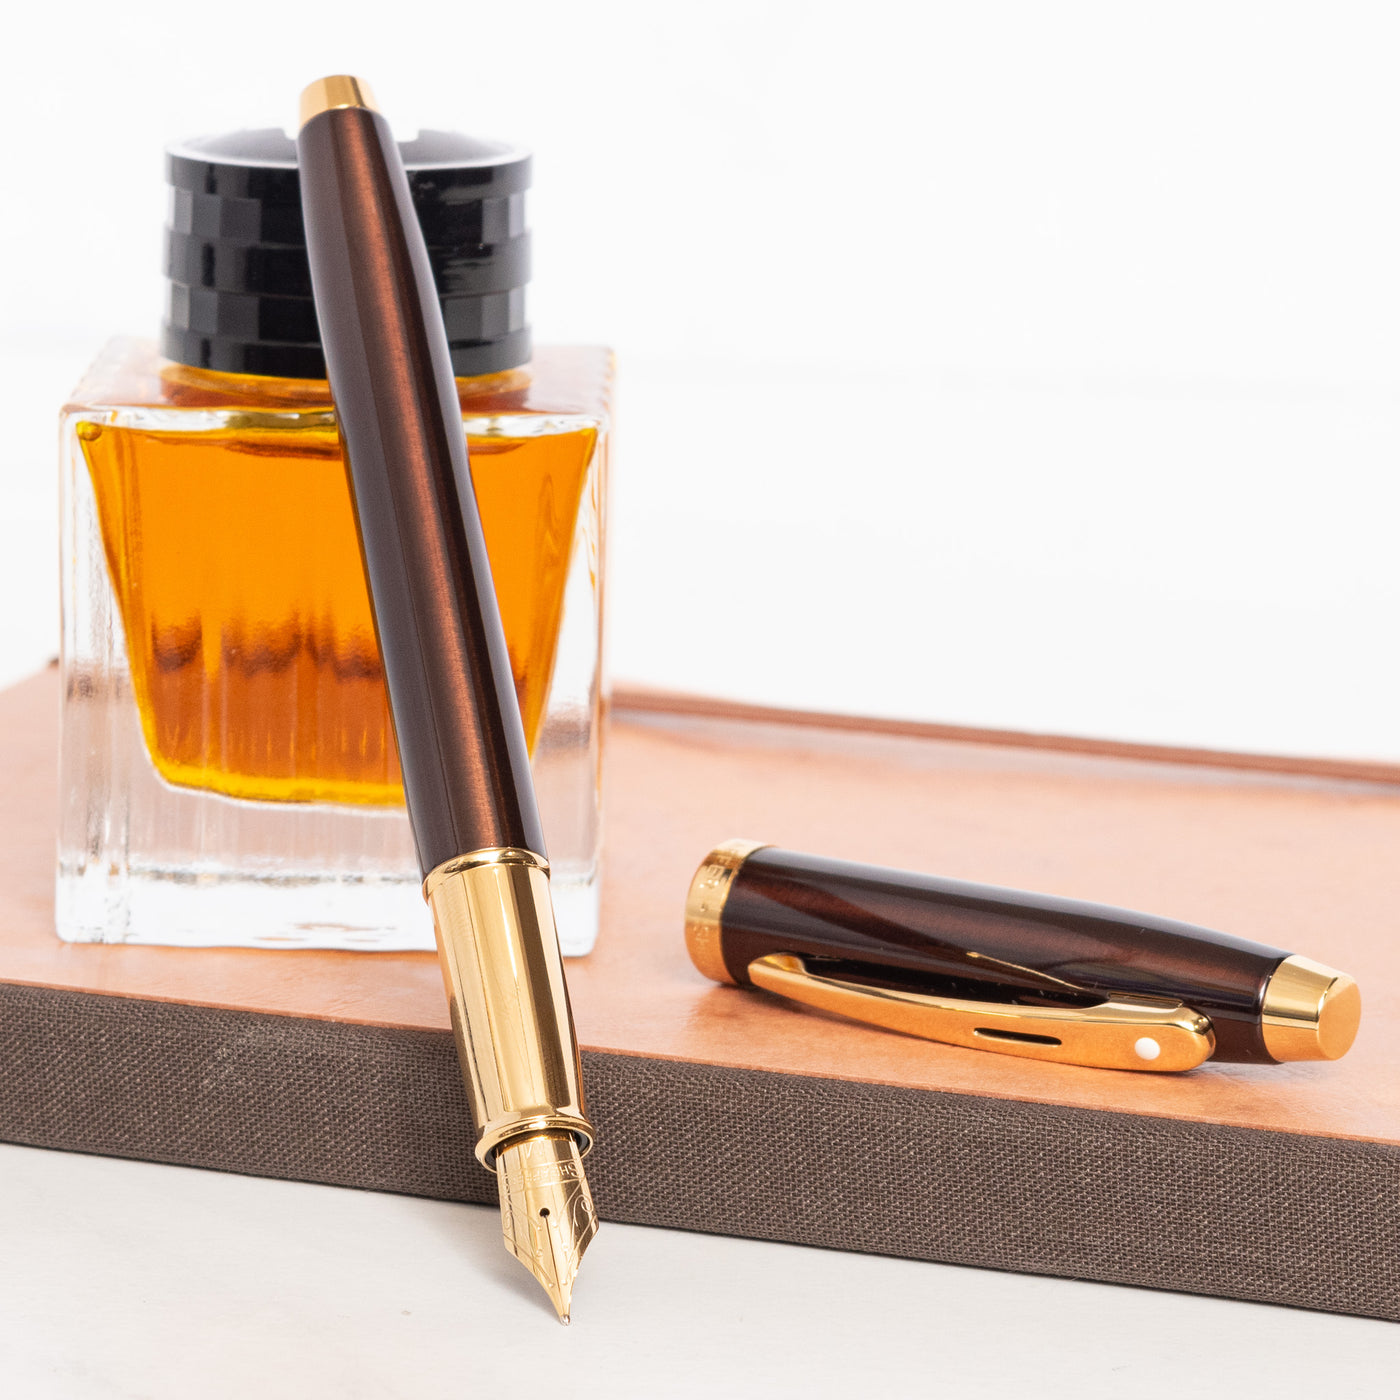 Sheaffer 100 Fountain Pen - Coffee Brown with PVD Gold Trim